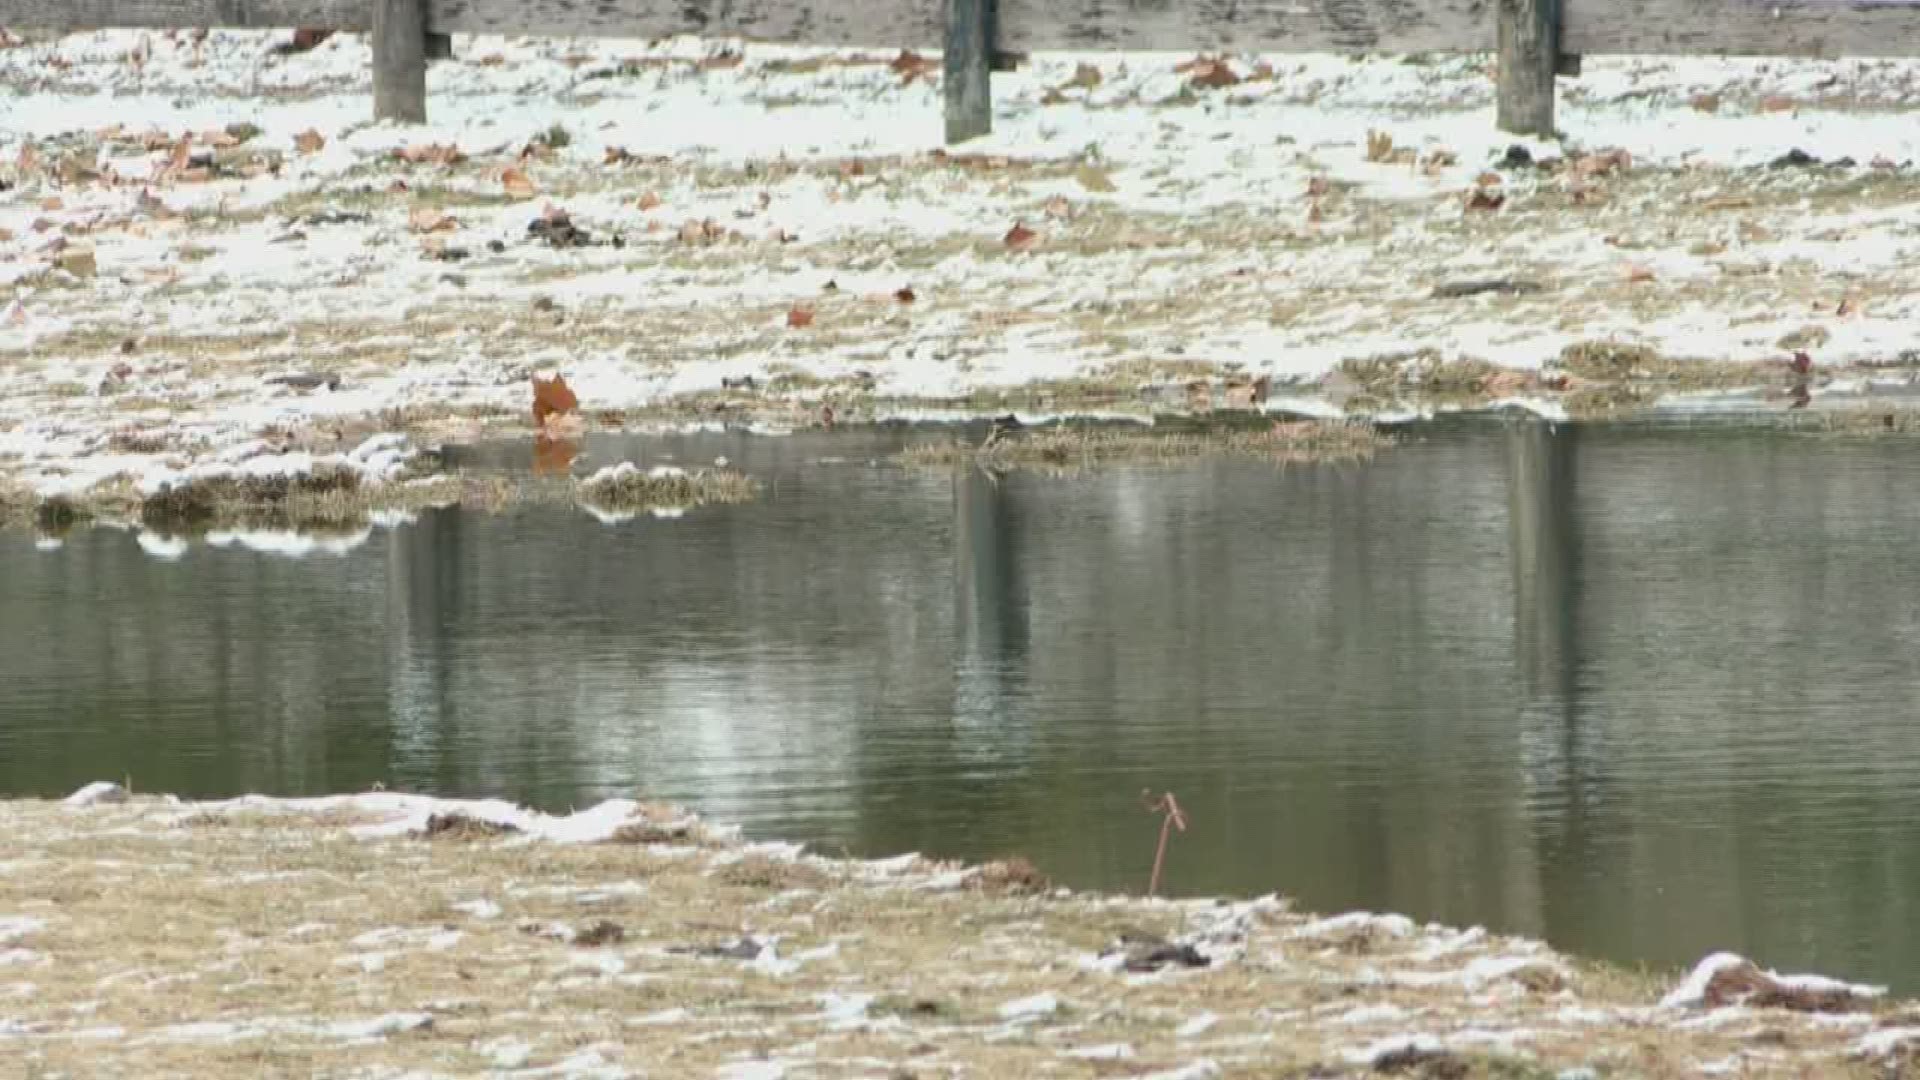 A woman driving by a freezing pond in Floyd County, Indiana saves a man after his car goes off the road.